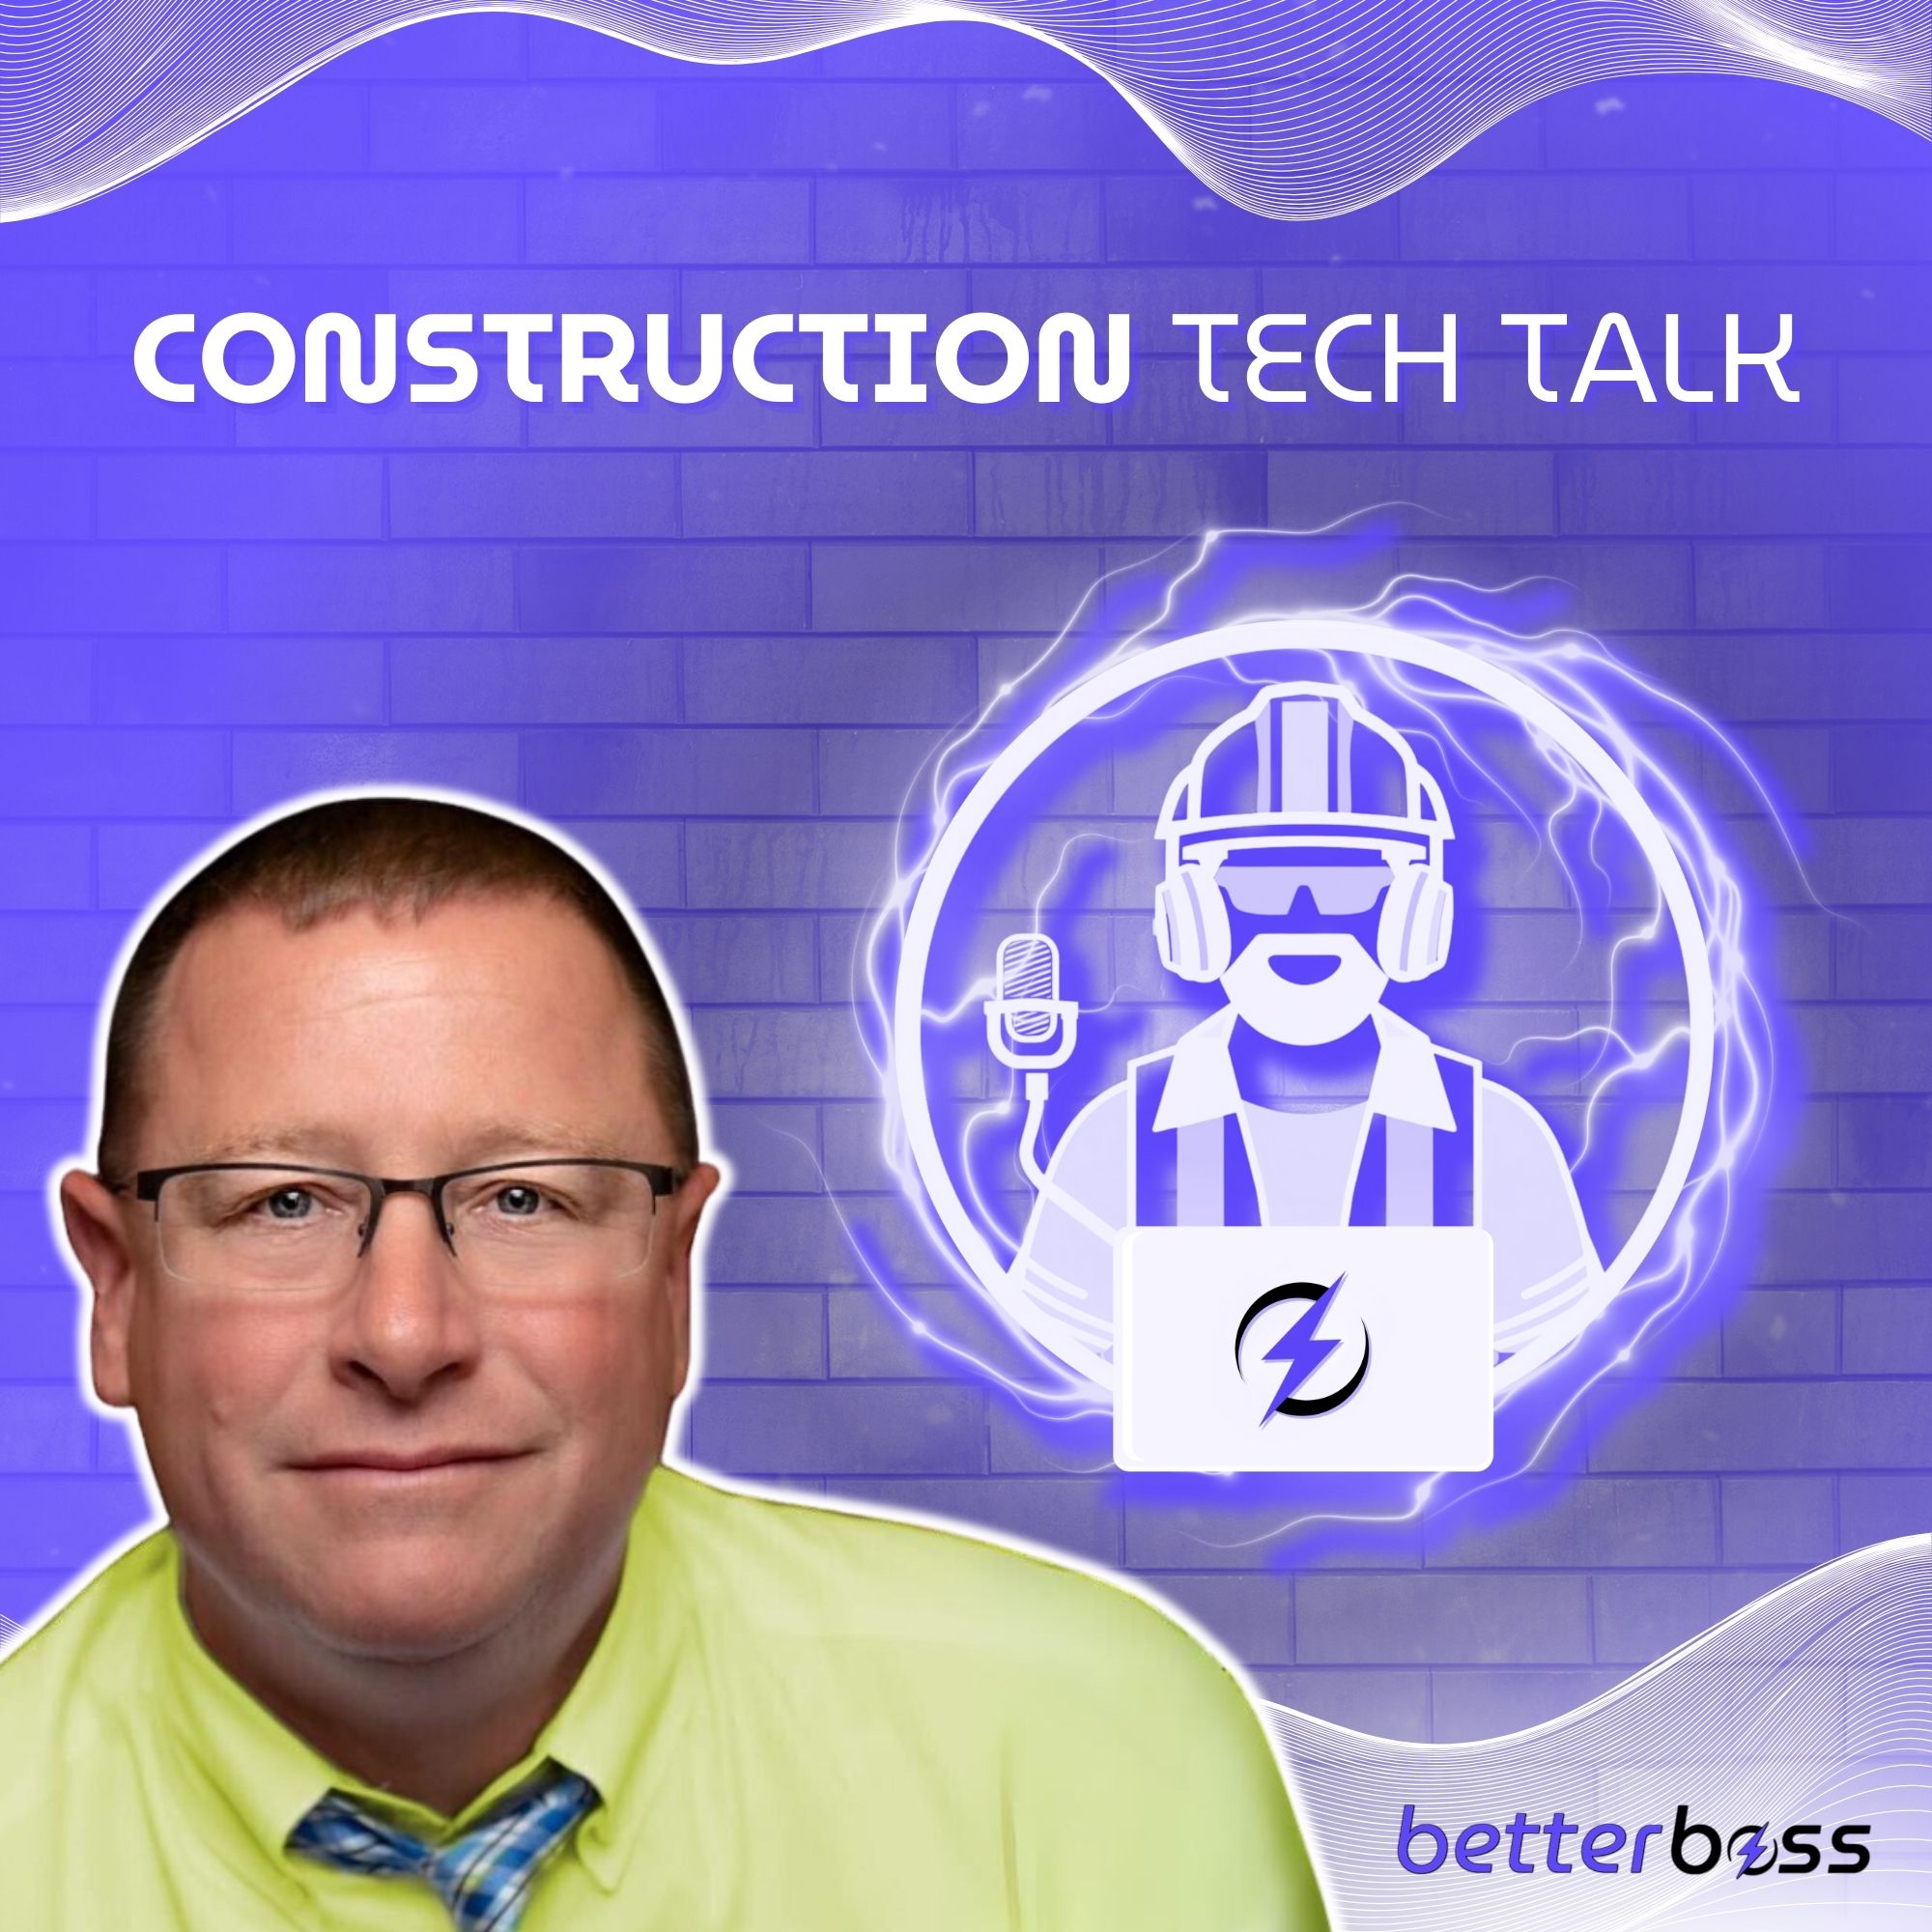 Cybersecurity for Construction & IT Systems in Construction, Construction Tech Talk Episode